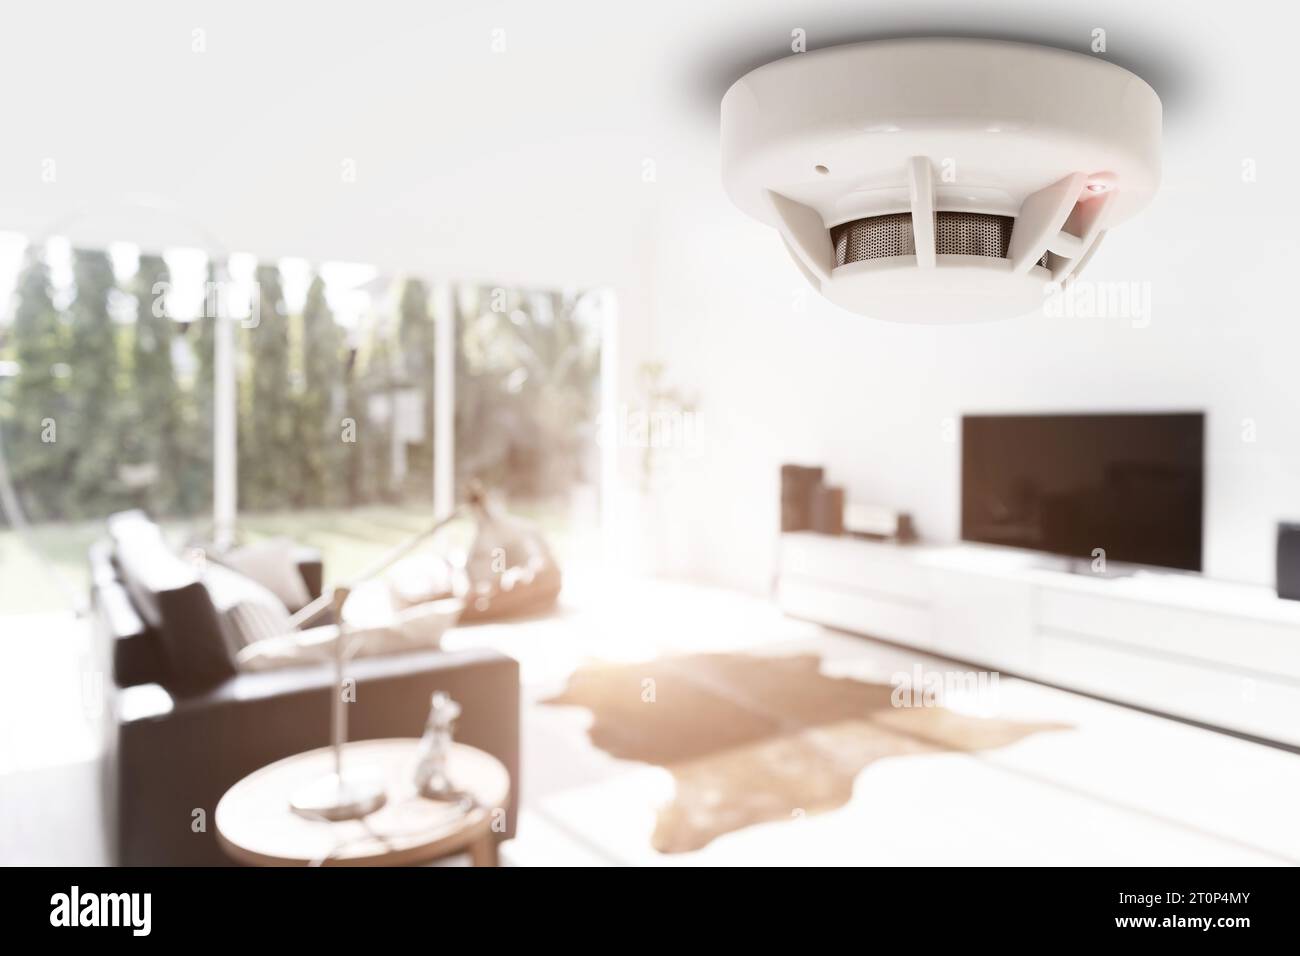 smoke detector fire alarm detector home safety device setup at home apartment room ceiling Stock Photo